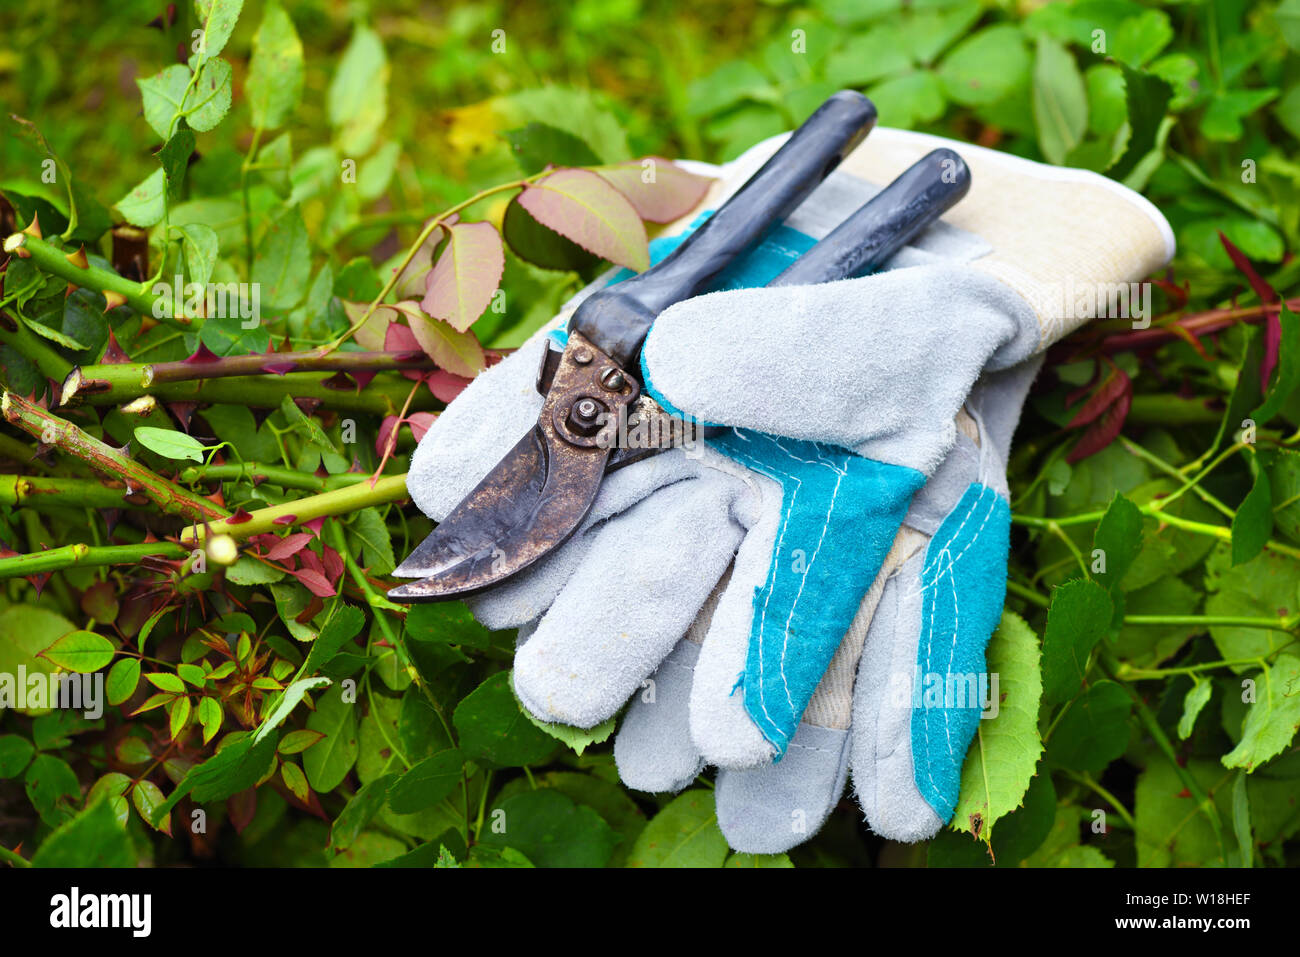 Garden gloves with secateurs for working in the garden Stock Photo